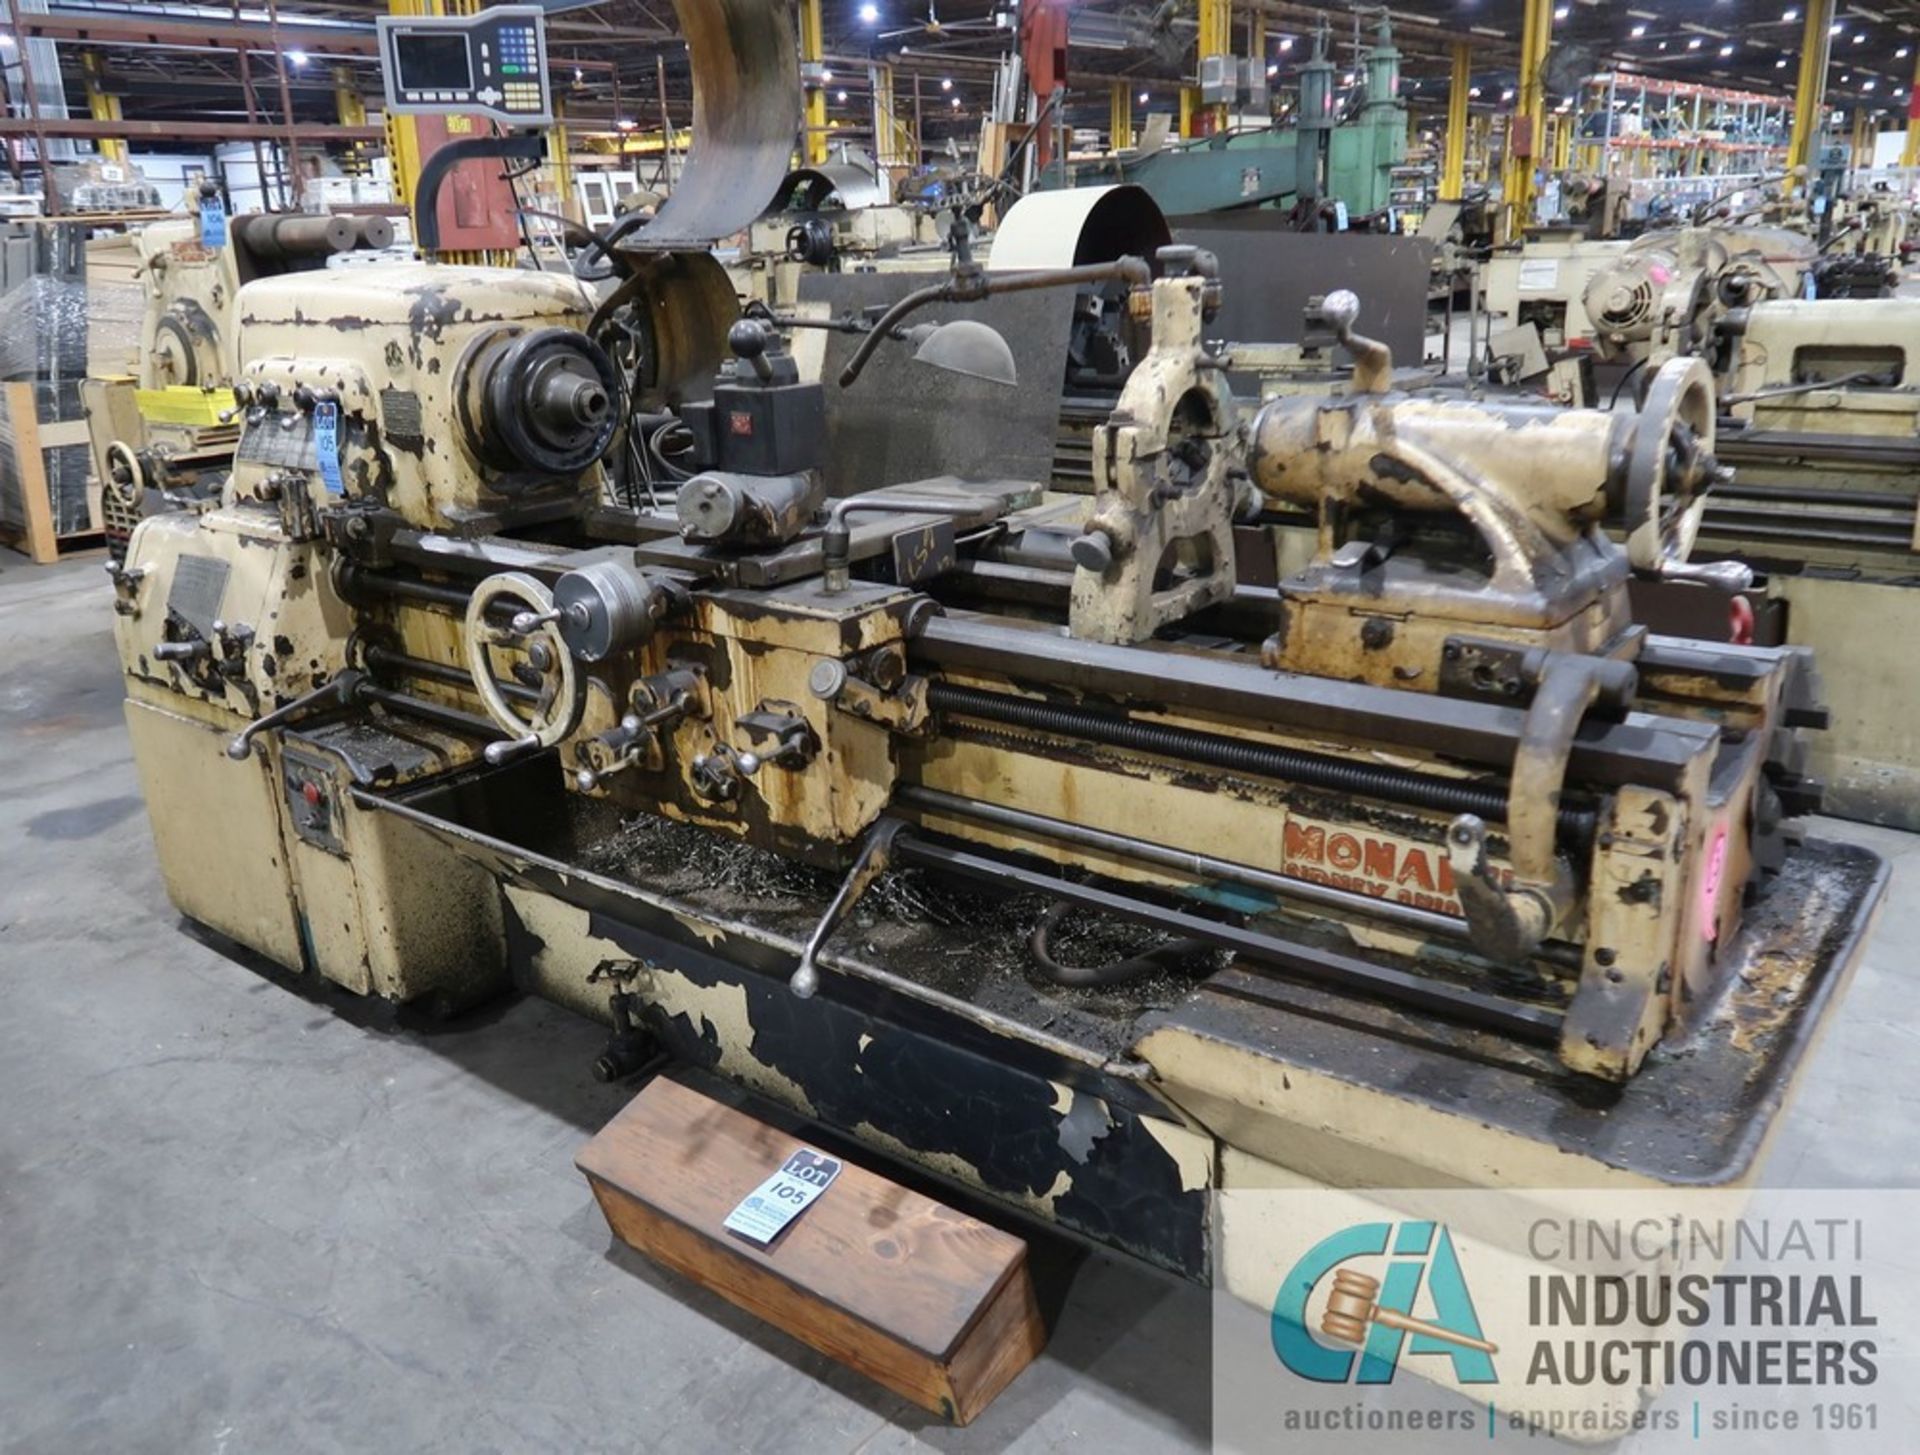 18" X 54" MONARCH GEARED HEAD ENGINE LATHE WITH TAPER S/N 31154, HARDINGE NO. 3 SPEED COLLET CHUCK